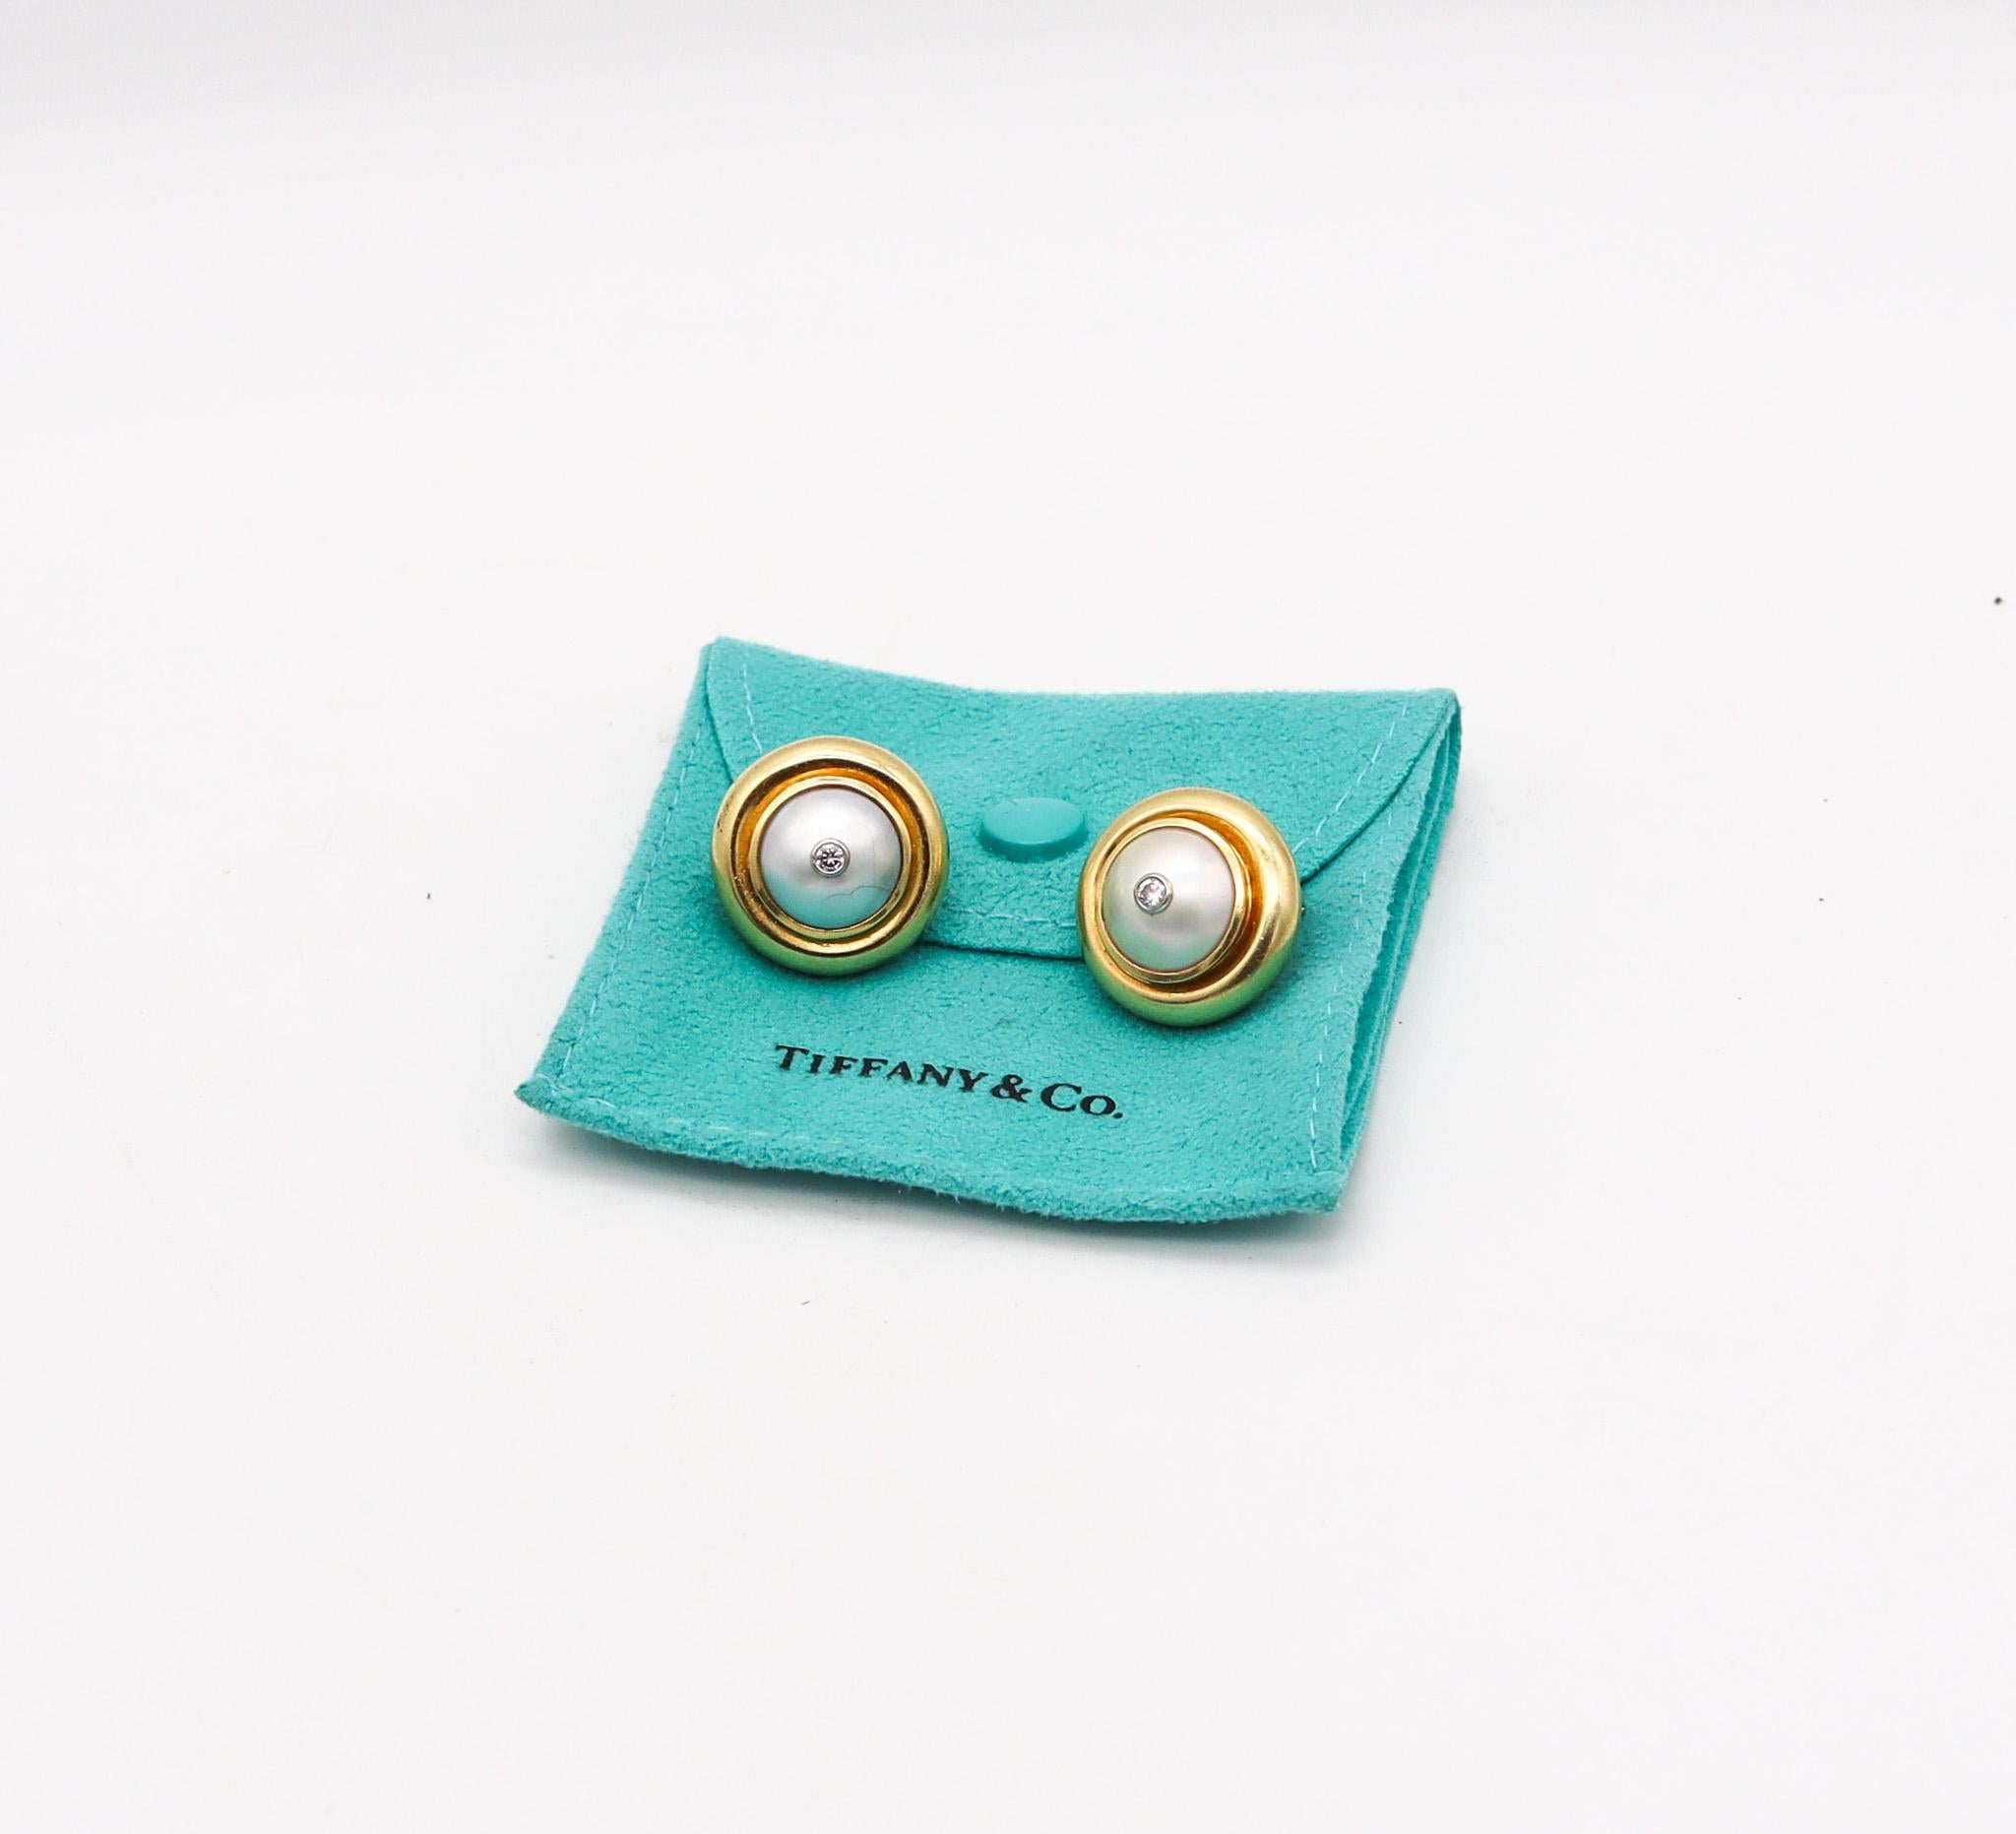 Earrings designed by Paloma Picasso for Tiffany & Co. 

Beautiful pair of ear clips, created in New York by iconic Paloma Picasso for the Tiffany Studios back in the 1981. These earrings are very rare and was part of the collection pearls privee.